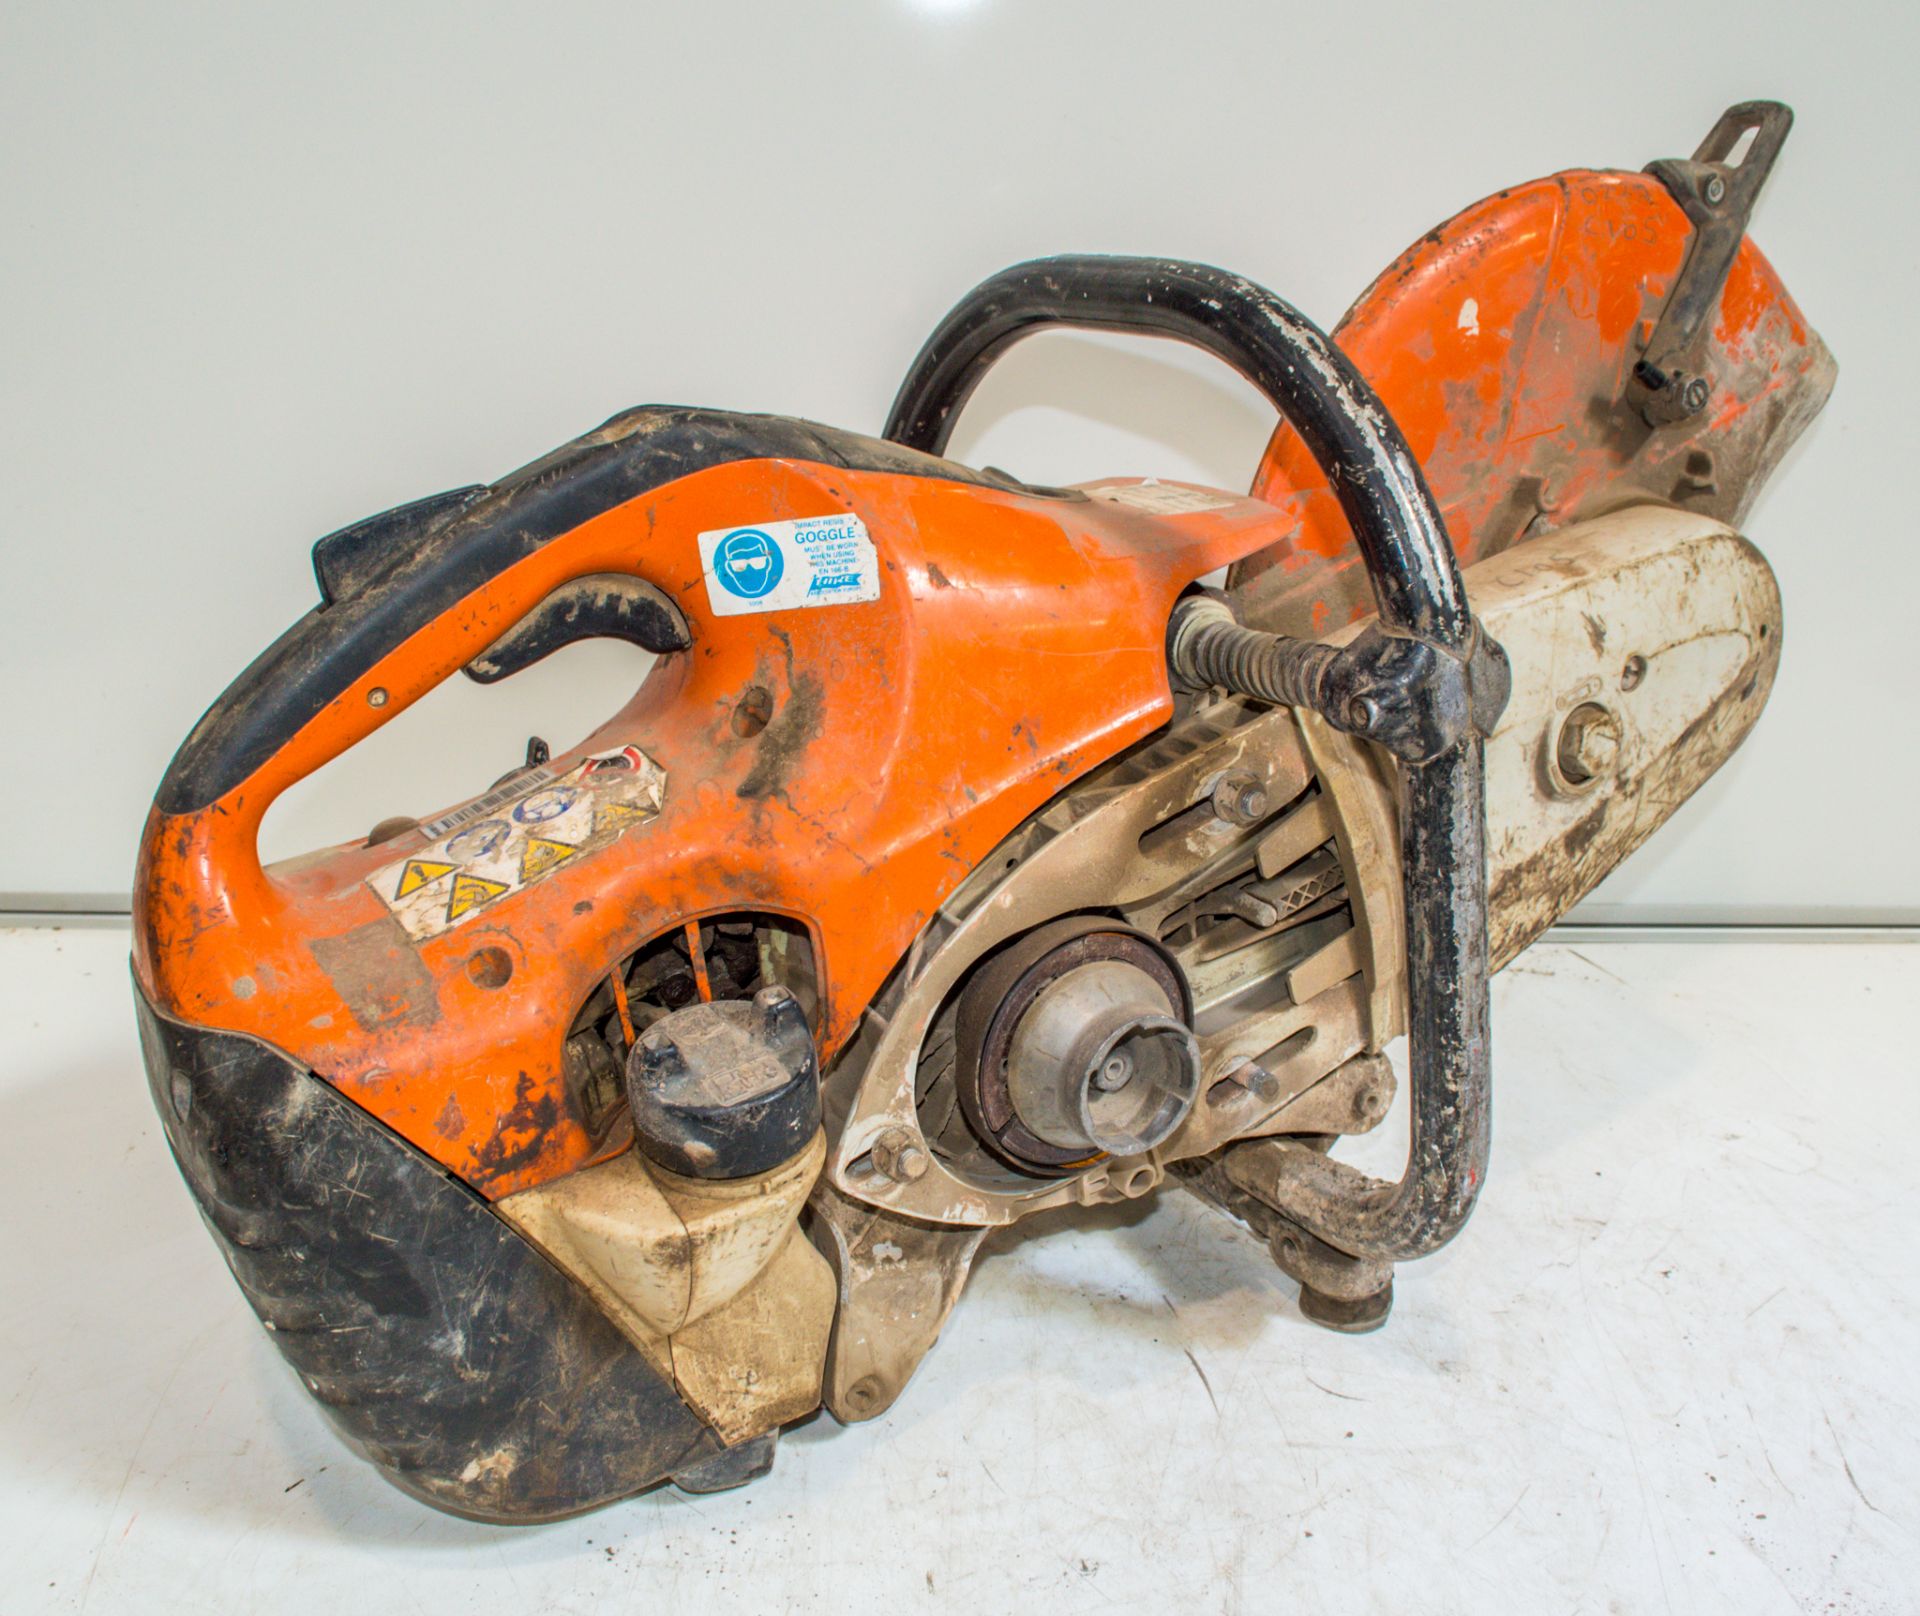 Stihl TS410 petrol driven cut off saw 0227C105 ** Pull cord assembly missing ** - Image 2 of 2